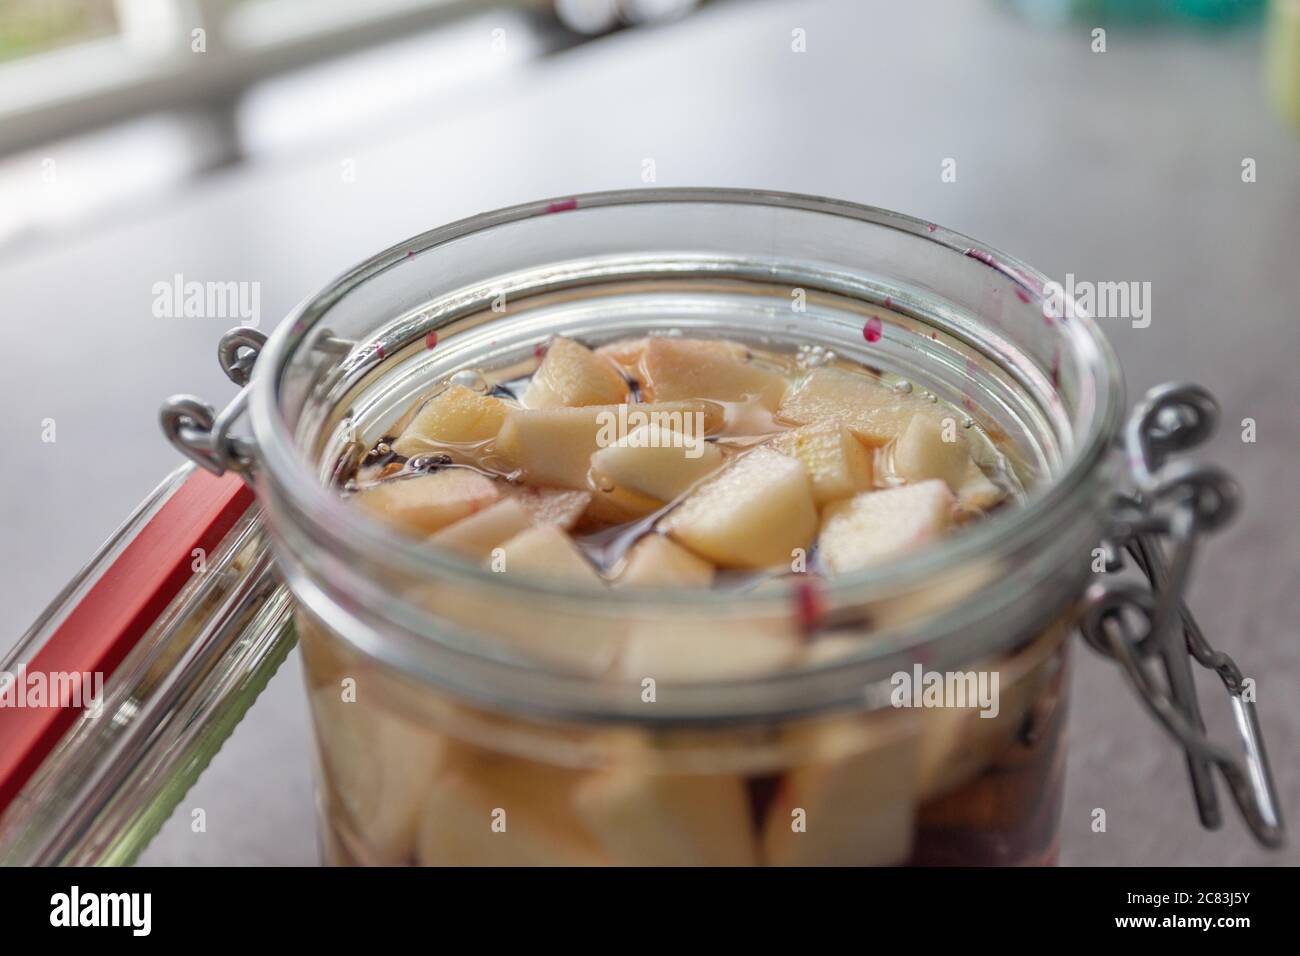 Closeup shot of a glass bank with cut fruits on a grey table Stock Photo